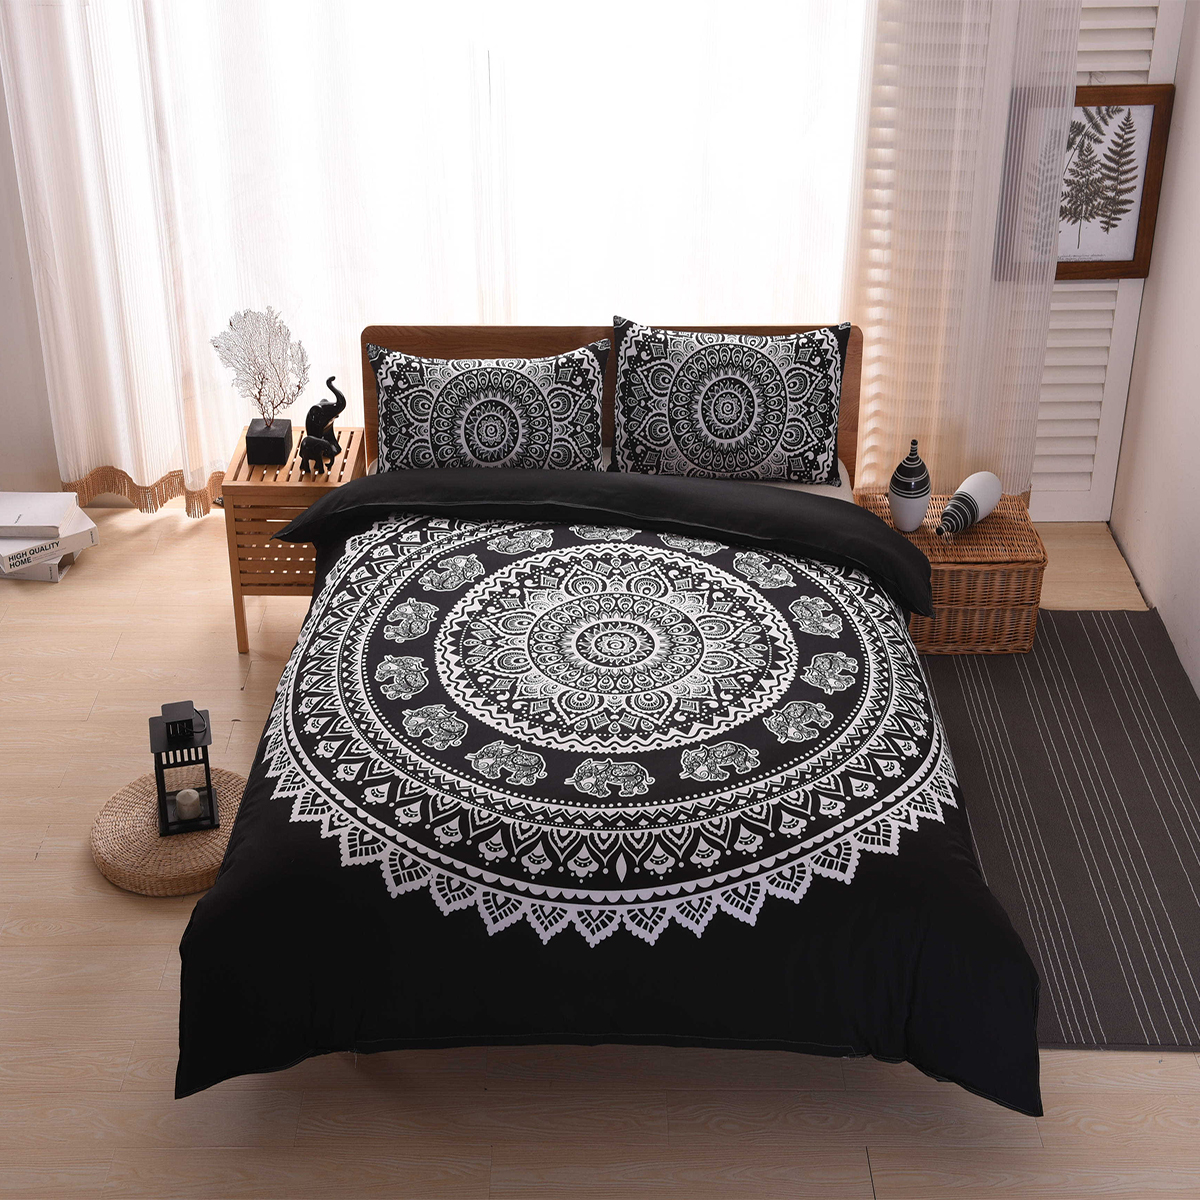 

3 PCS Bedding Sets Bohemian National Style Pillowcase Quilt Cover For Queen Size